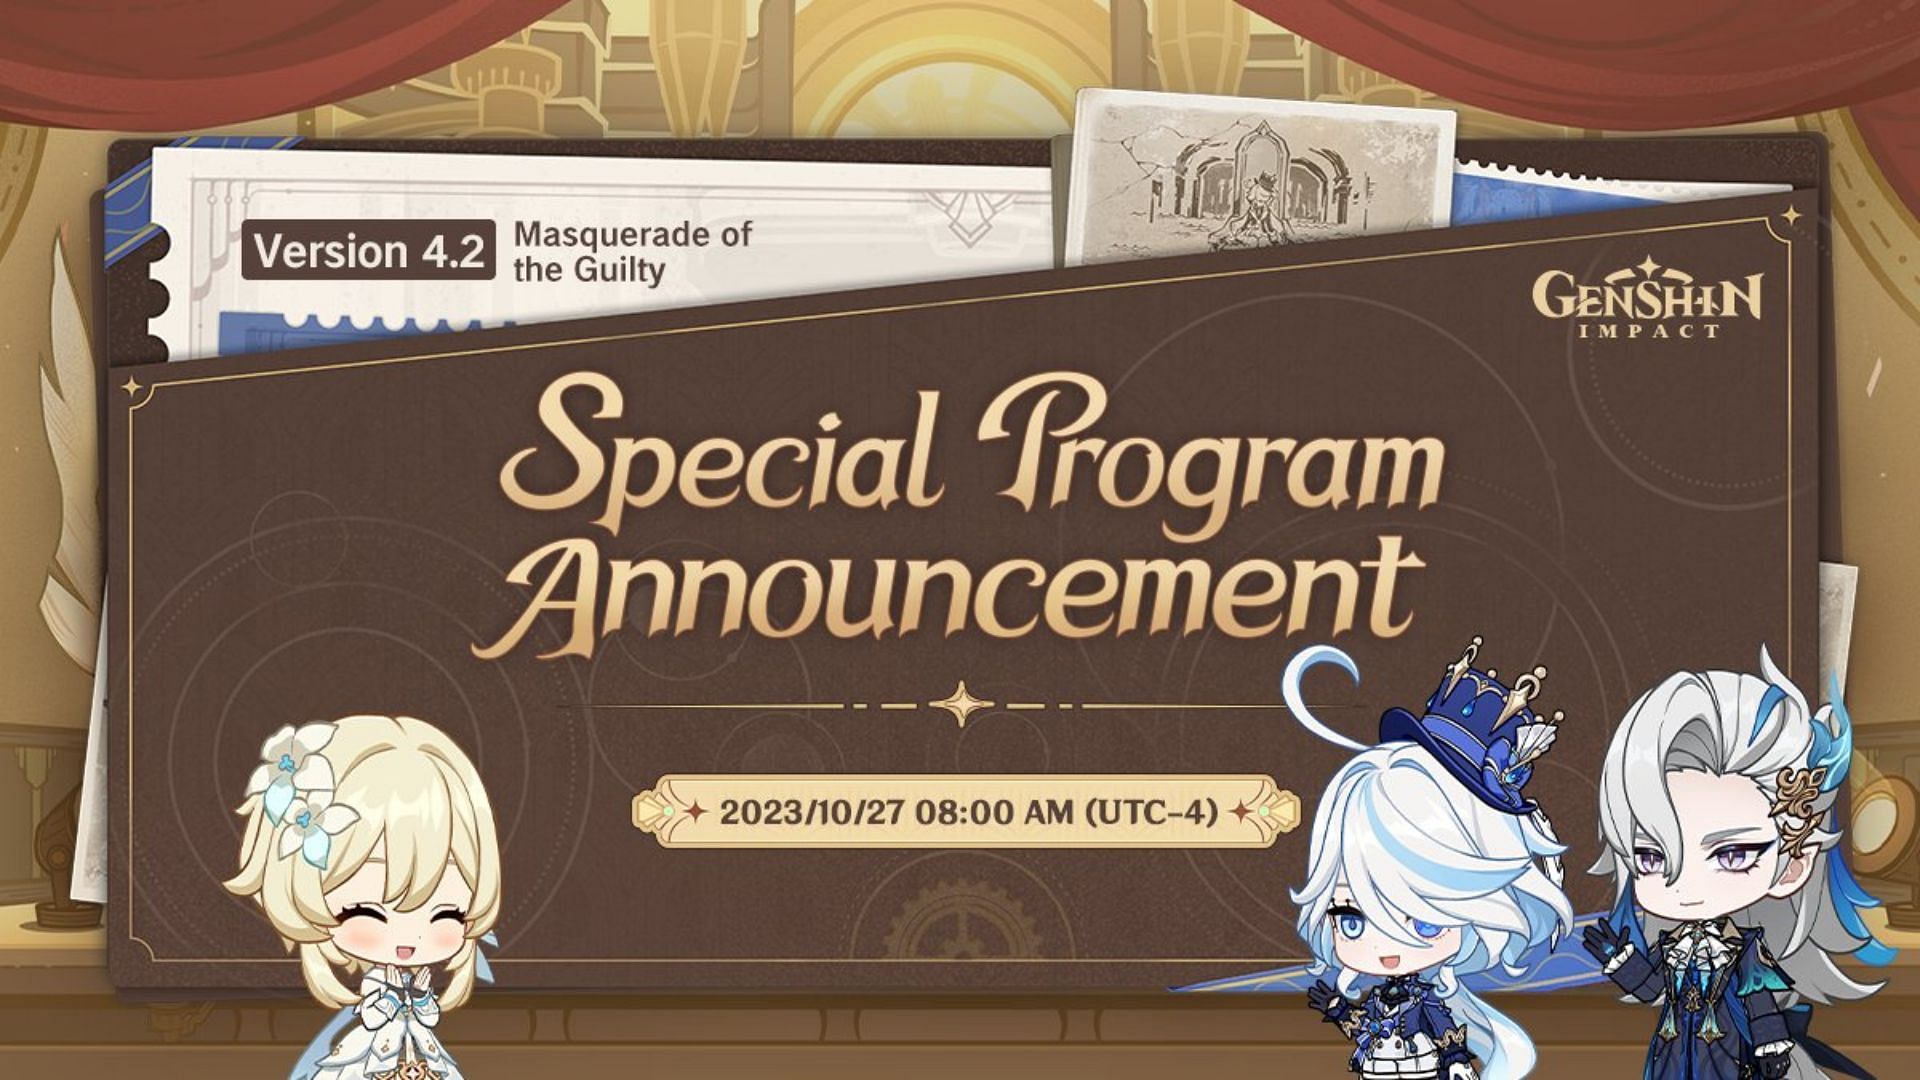 4.0 Livestream Date, Countdown, and Summary